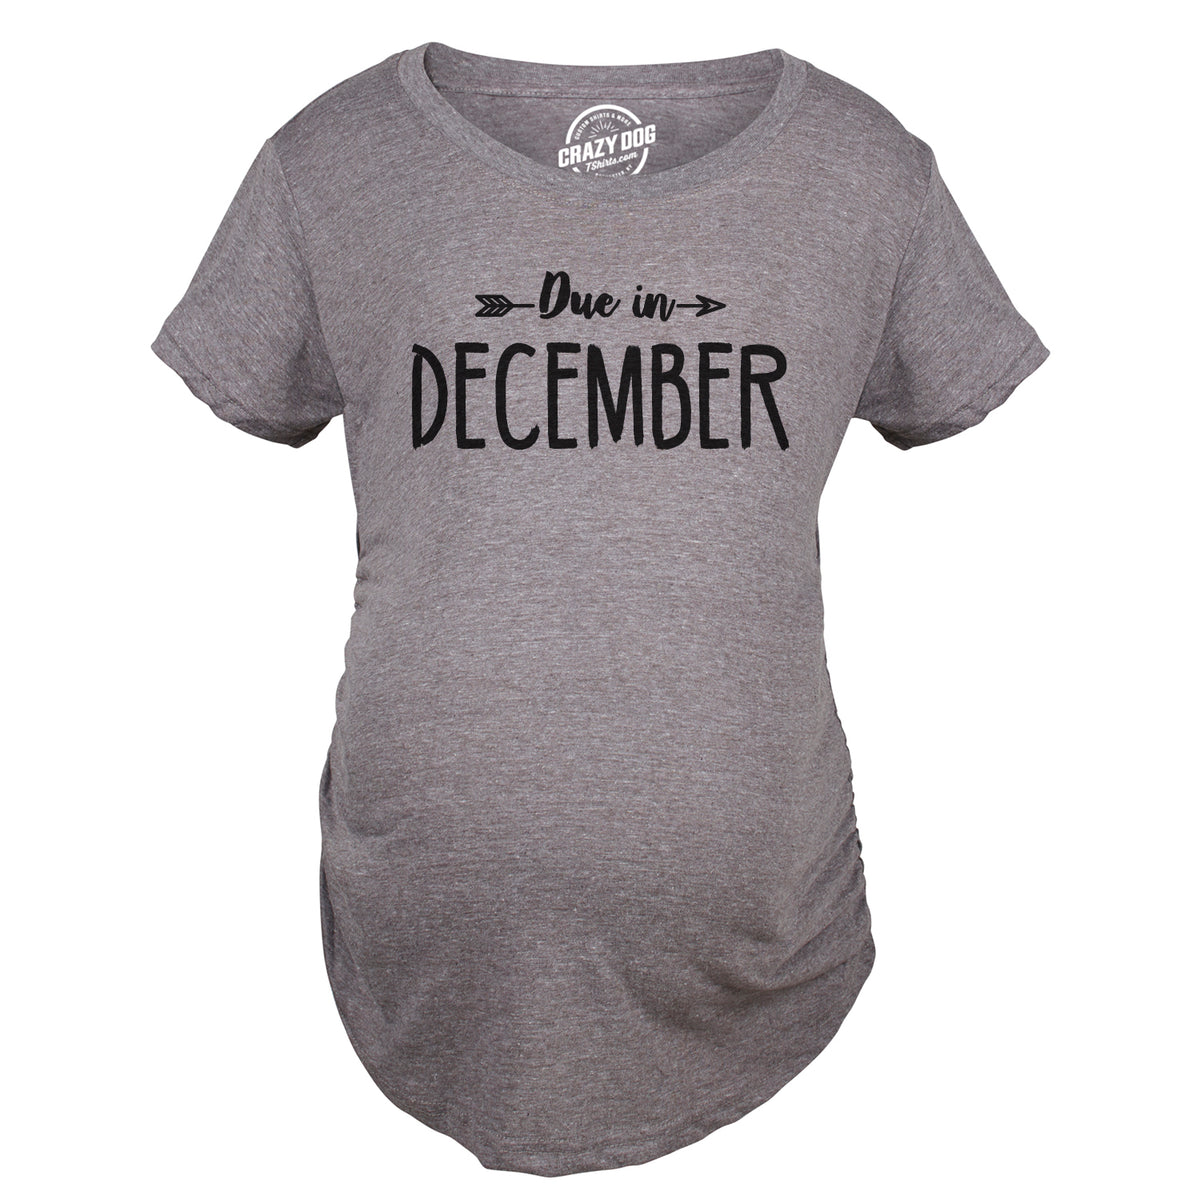 Funny Dark Heather Grey - December Due In Announcement Maternity T Shirt Nerdy Tee